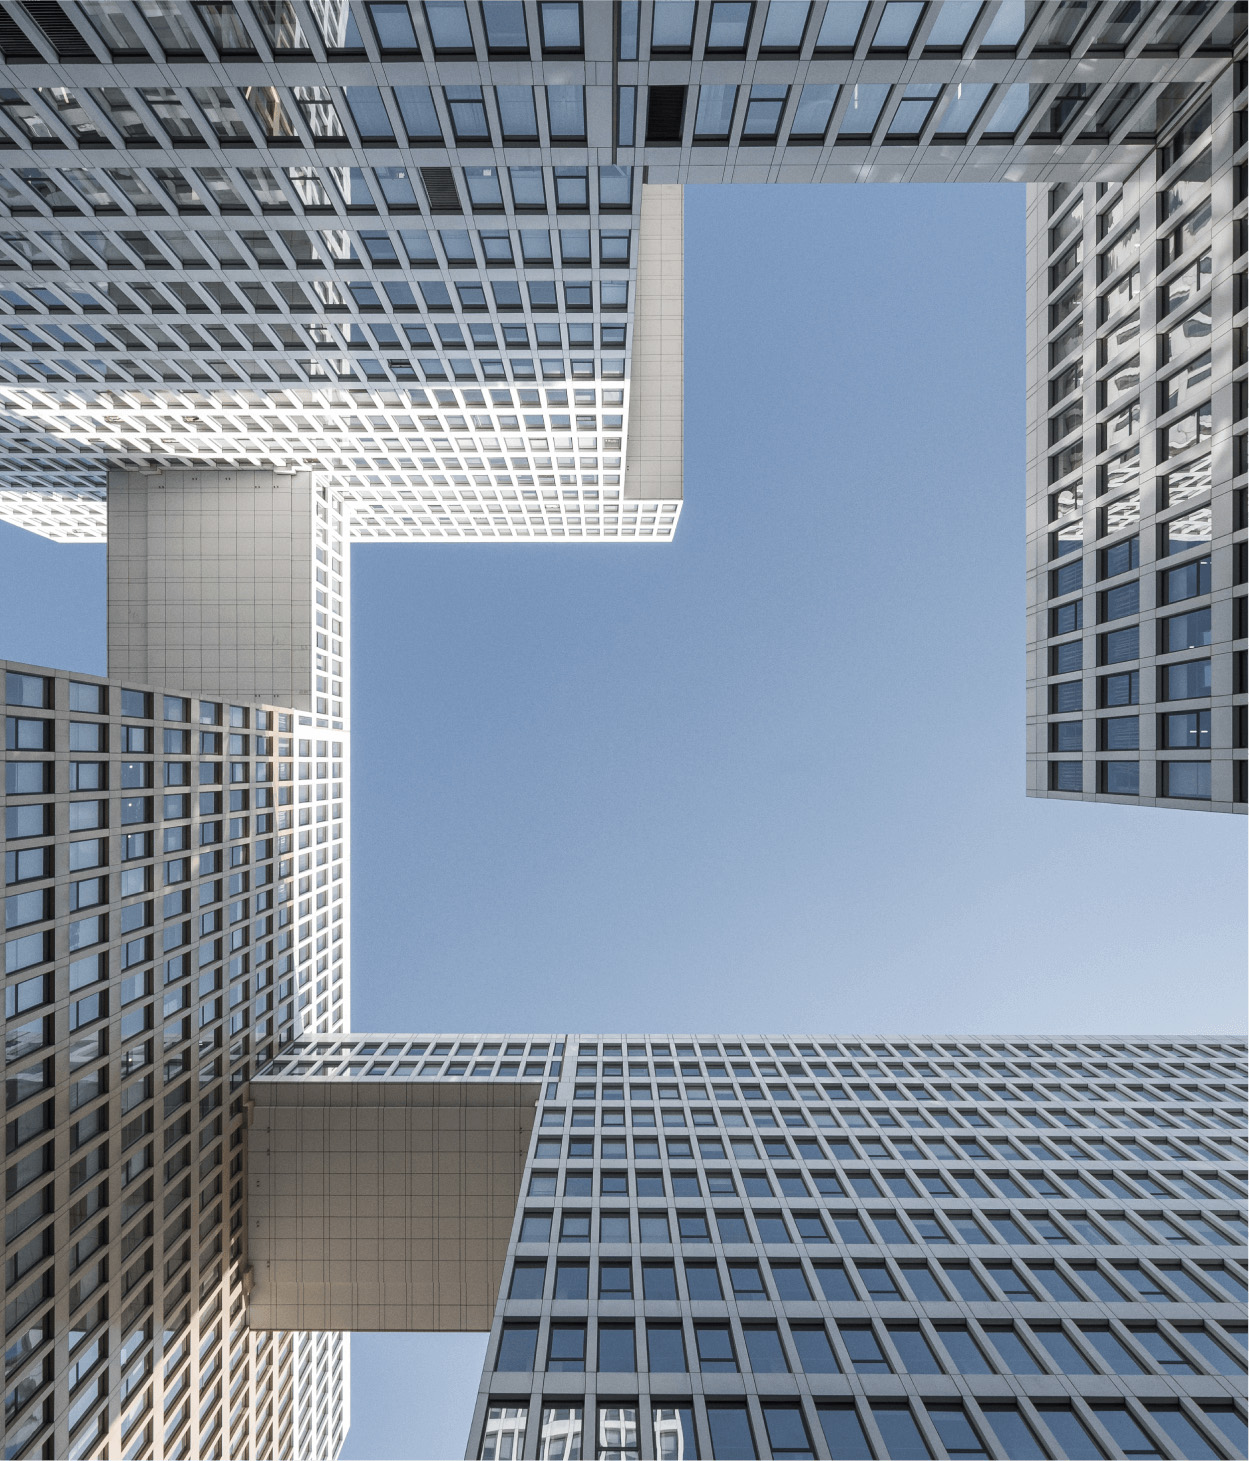 photo of skyscrapers connected by skywalks. The viewer is looking up at the skyscrapers from ground level so that the blue sky can be seen between them.